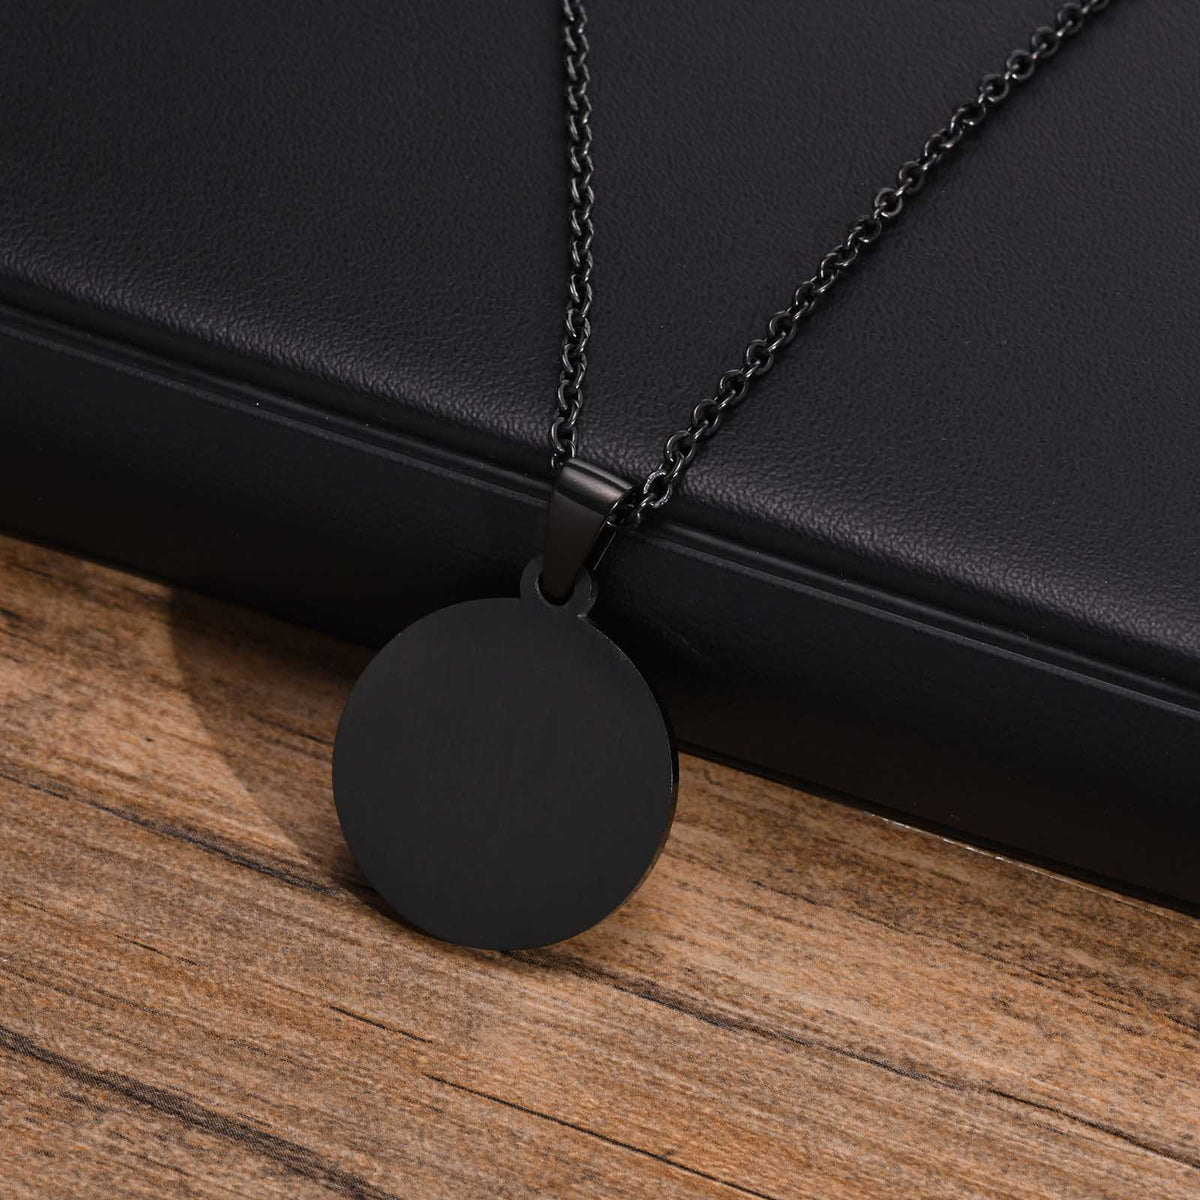 4 Qul Black Stainless Steel Necklace Islamic Jewelry